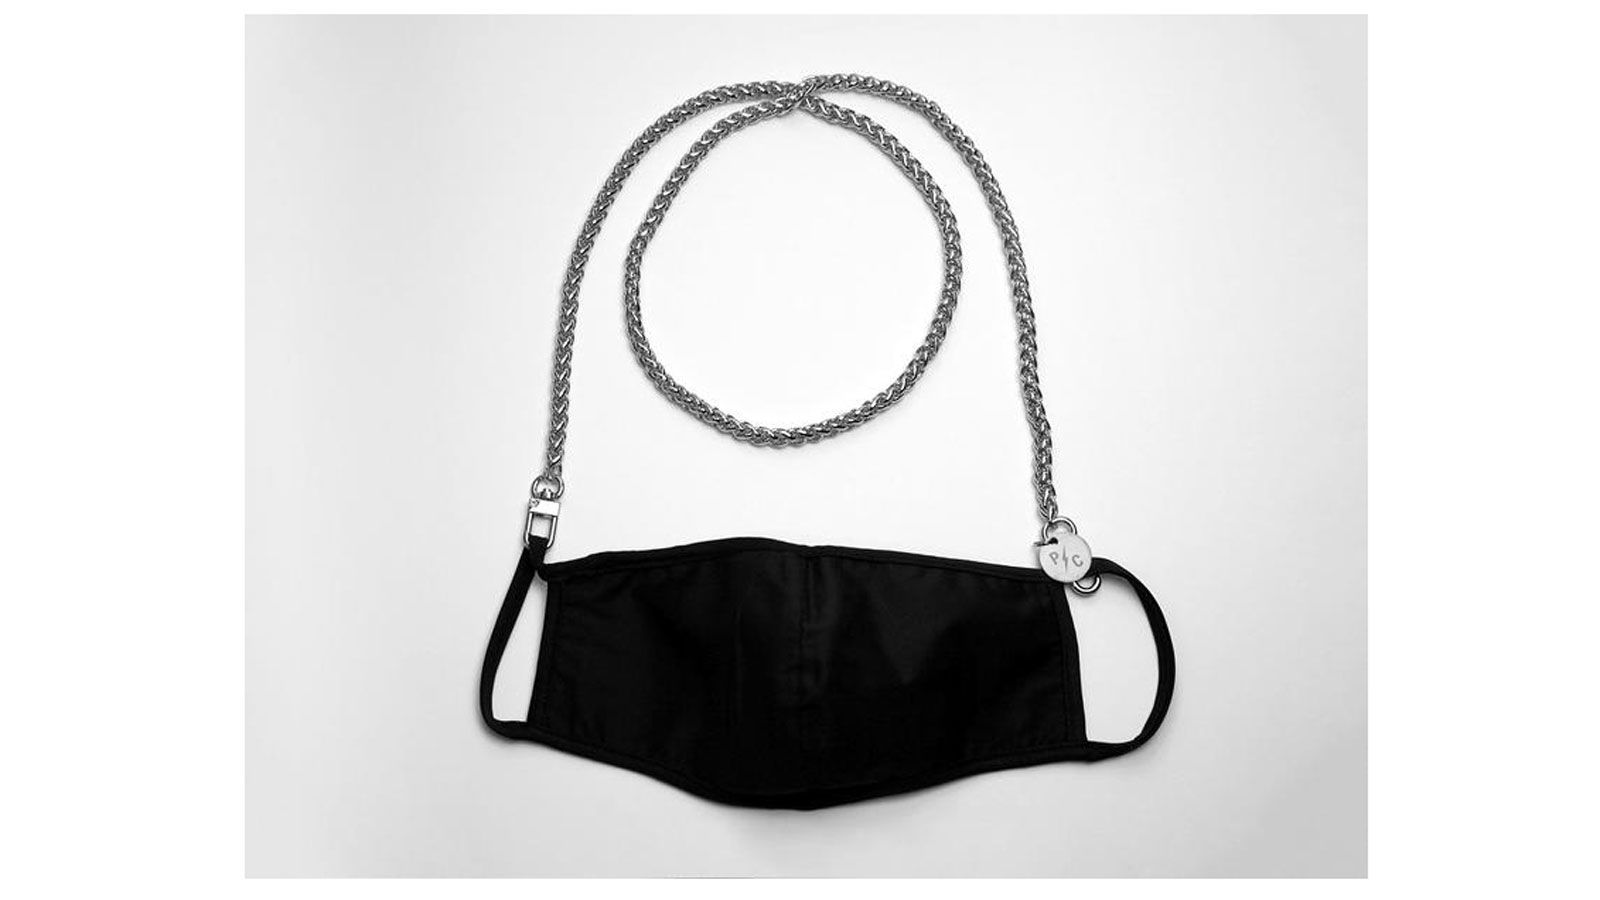 Black Chain Mask Holder Necklace, small link mask leash